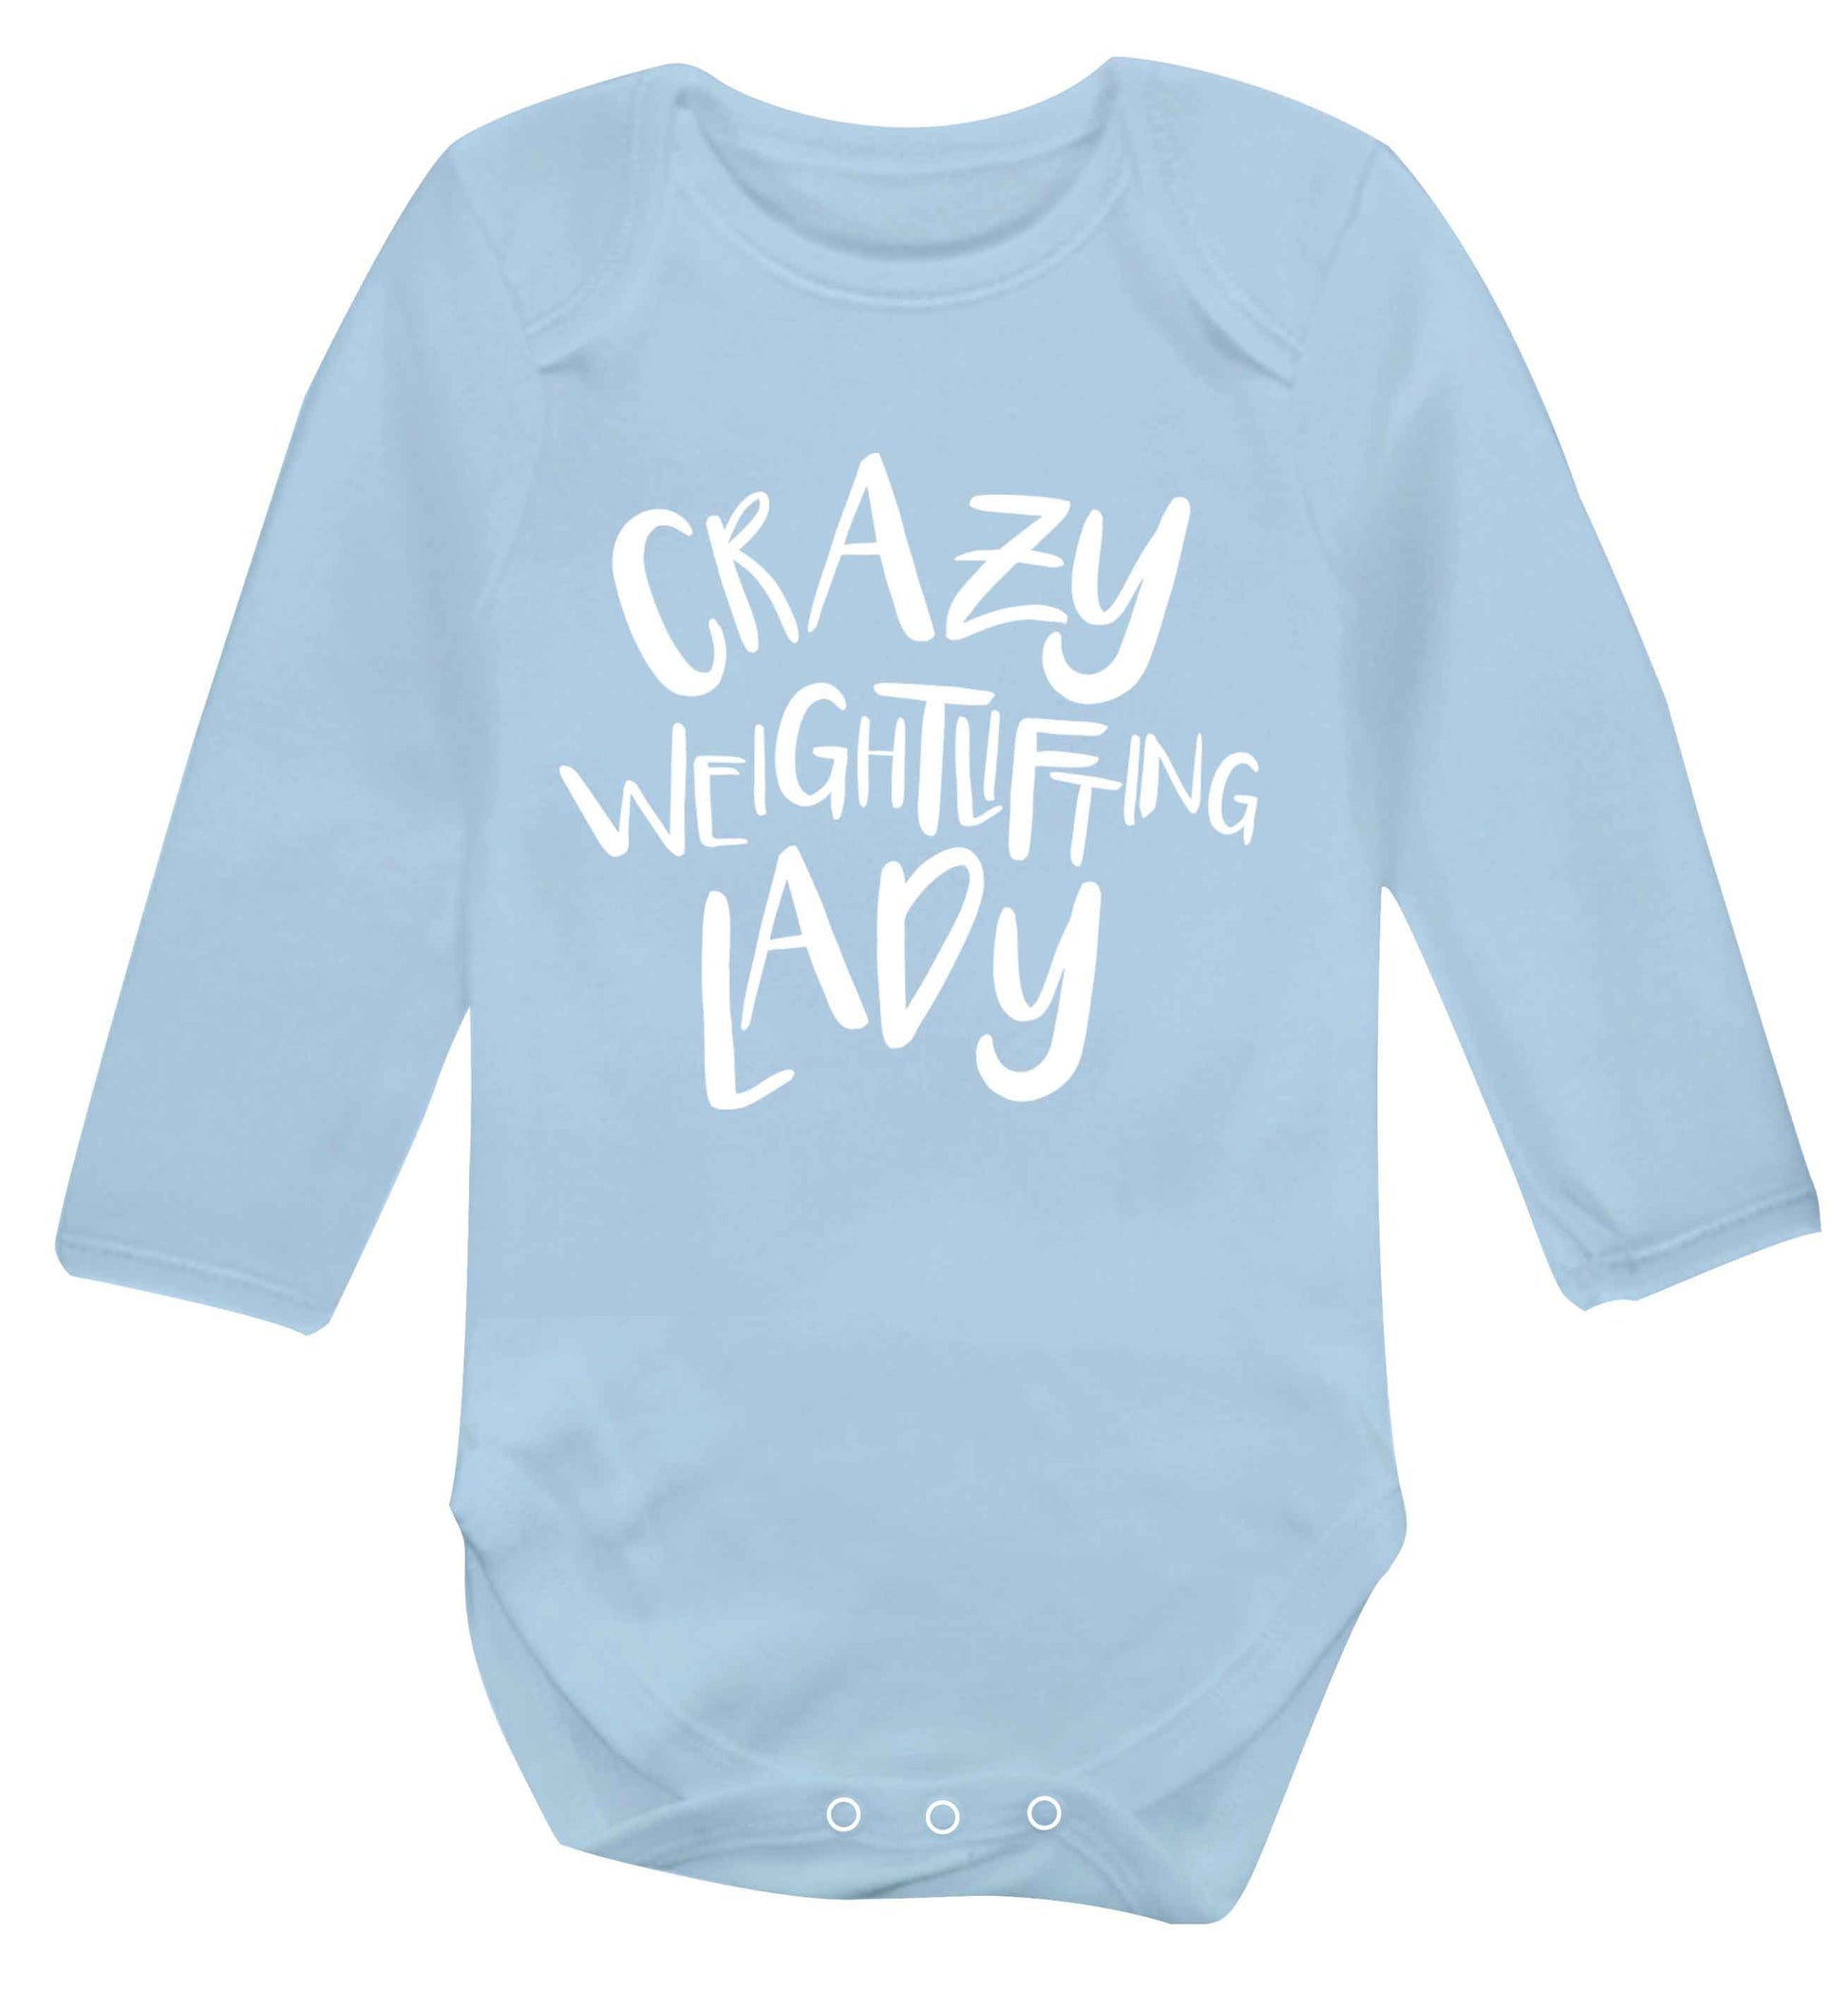 Crazy weightlifting lady Baby Vest long sleeved pale blue 6-12 months